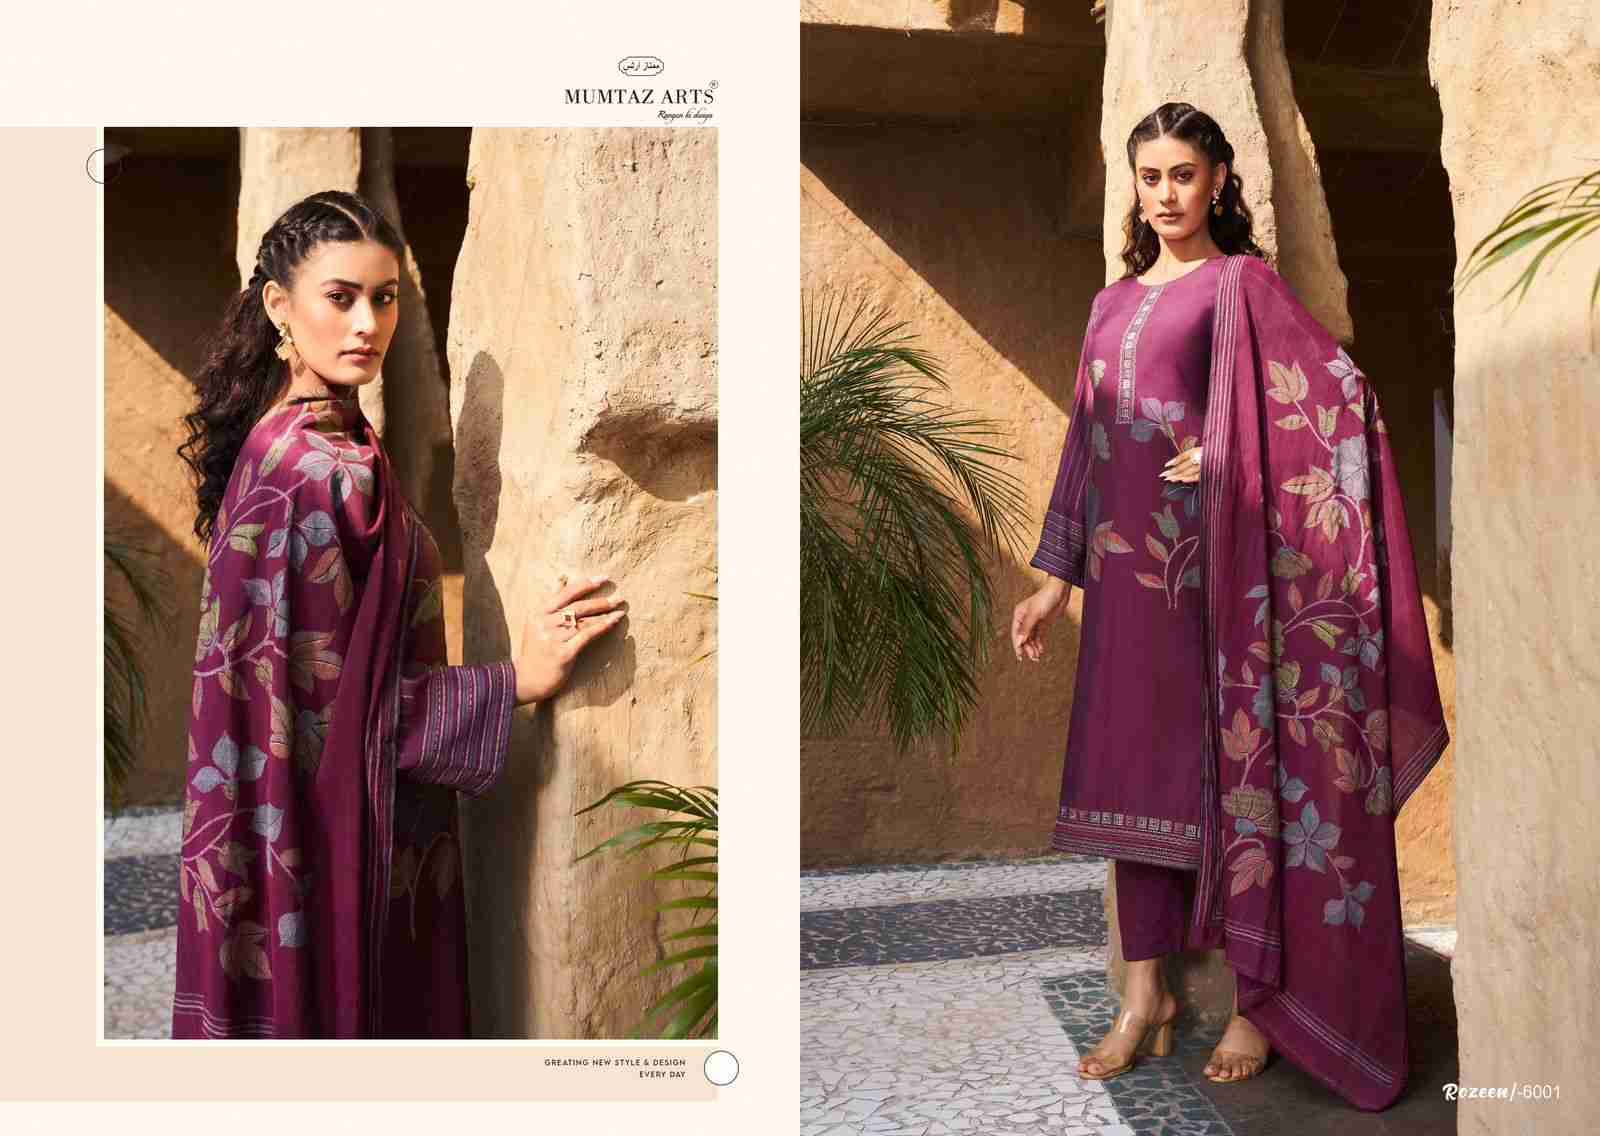 Rozeen By Mumtaz Arts 6001 To 6006 Series Beautiful Festive Suits Colorful Stylish Fancy Casual Wear & Ethnic Wear Pure Viscose Muslin Embroidered Dresses At Wholesale Price